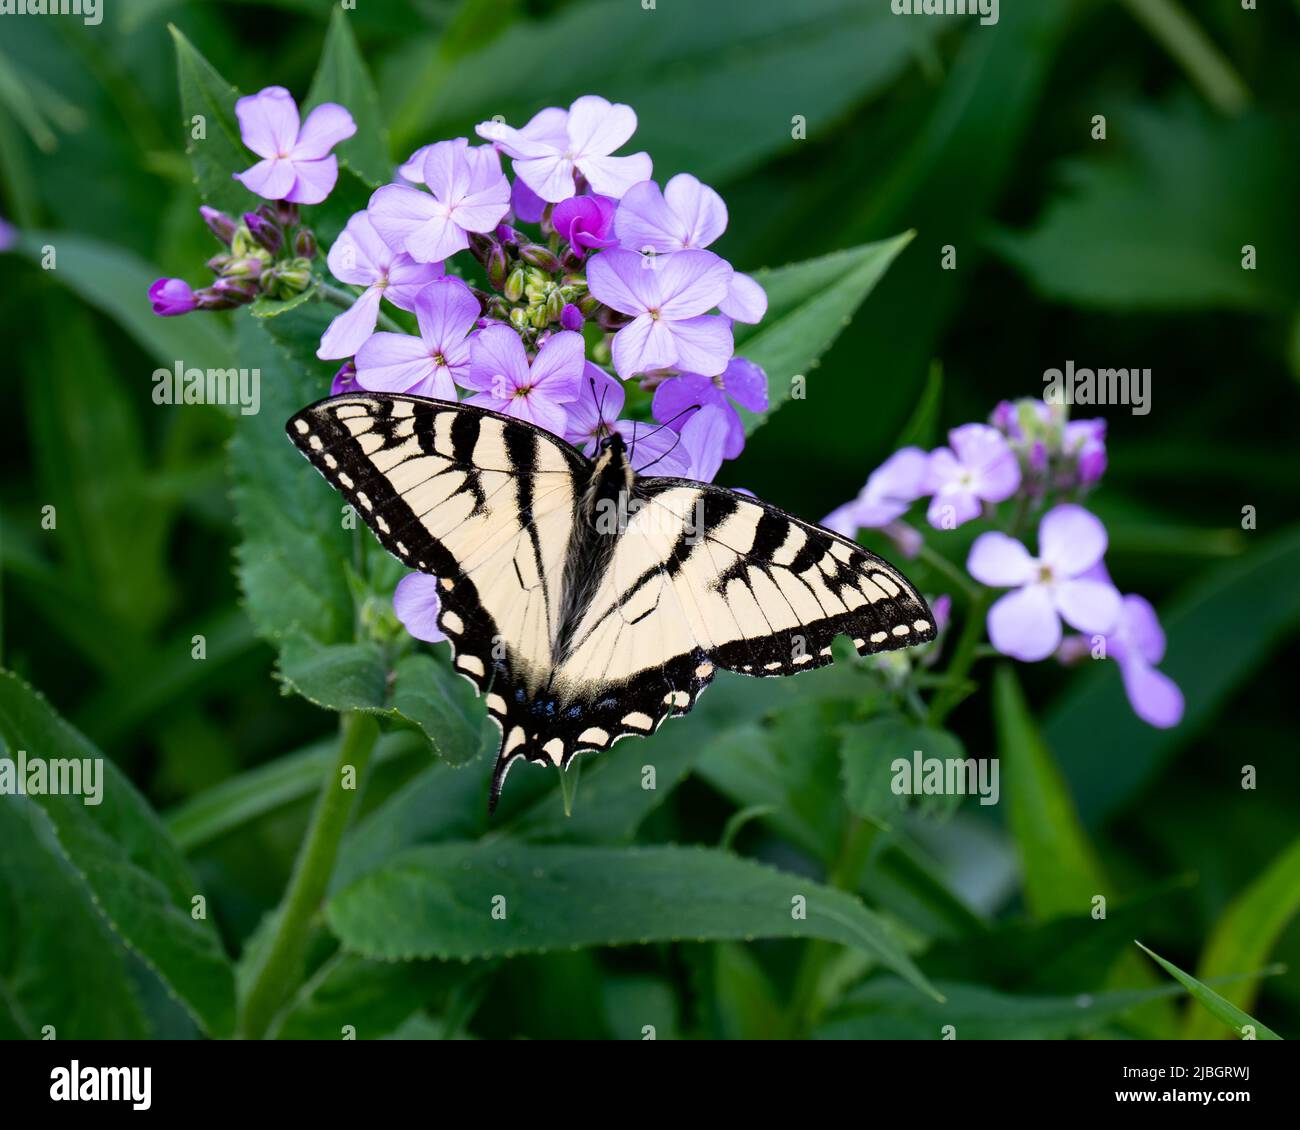 An Eastern Tiger Swallowtail butterfly, Papilio glaucus, pollinating Dame's Rocket, Hesperis matronalis, flowers in a garden Stock Photo